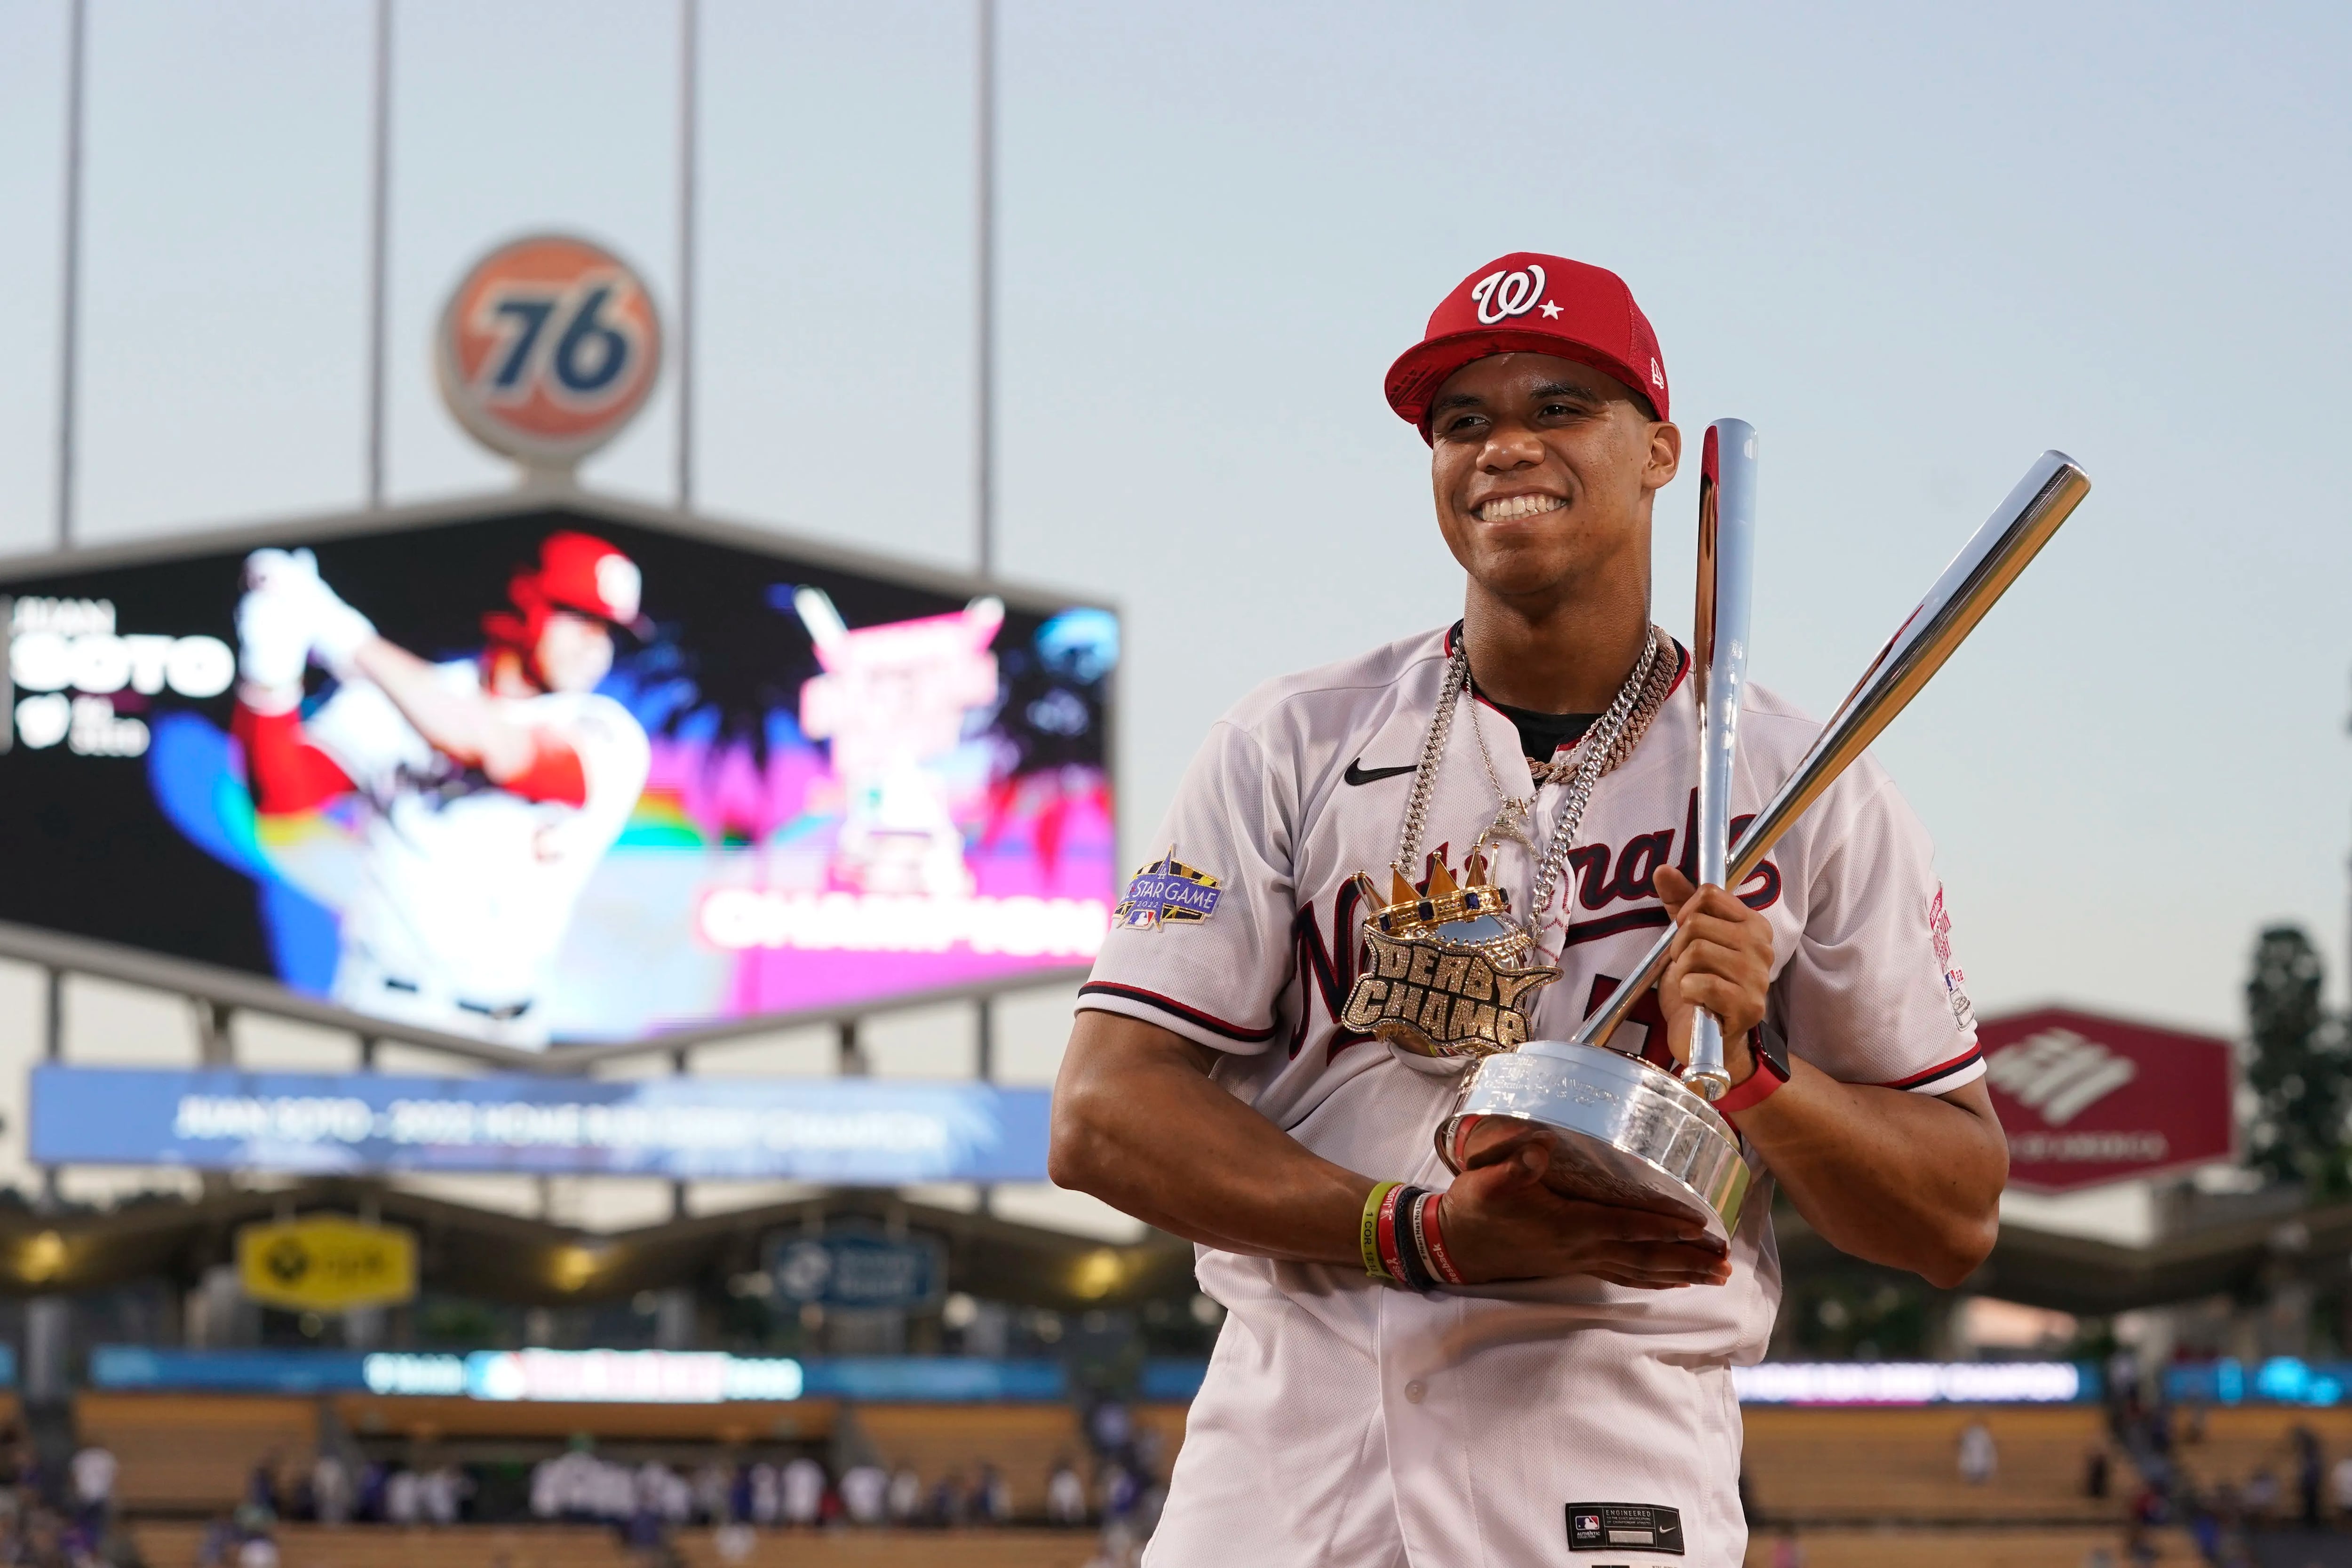 Juan Soto holds the winner's trophy after winning the 2022 Home Run Derby.